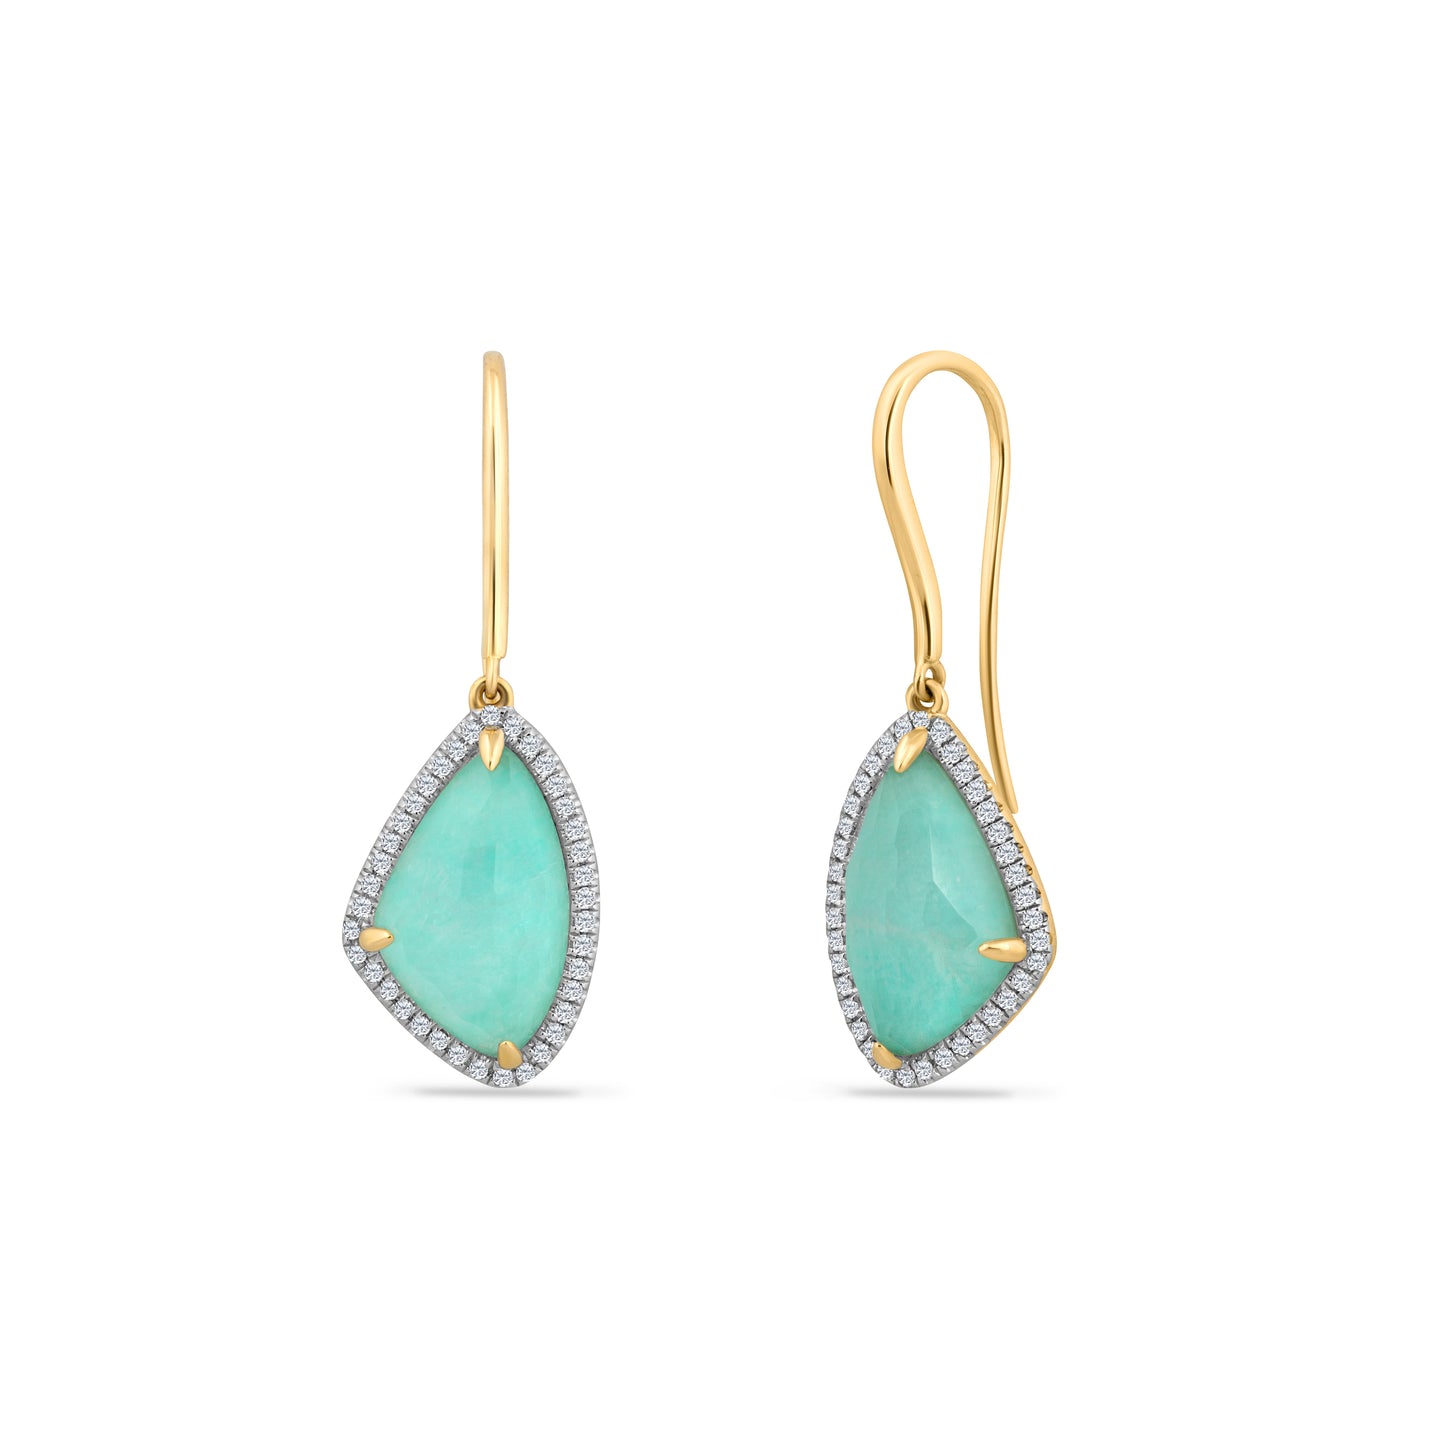 14K DOUBLET 2 AMAZONITE AND 2 CRYSTALS EARRINGS WITH 7 DIAMONDS 0.26CT, 11MM WIDTH & 15MM HEIGHT